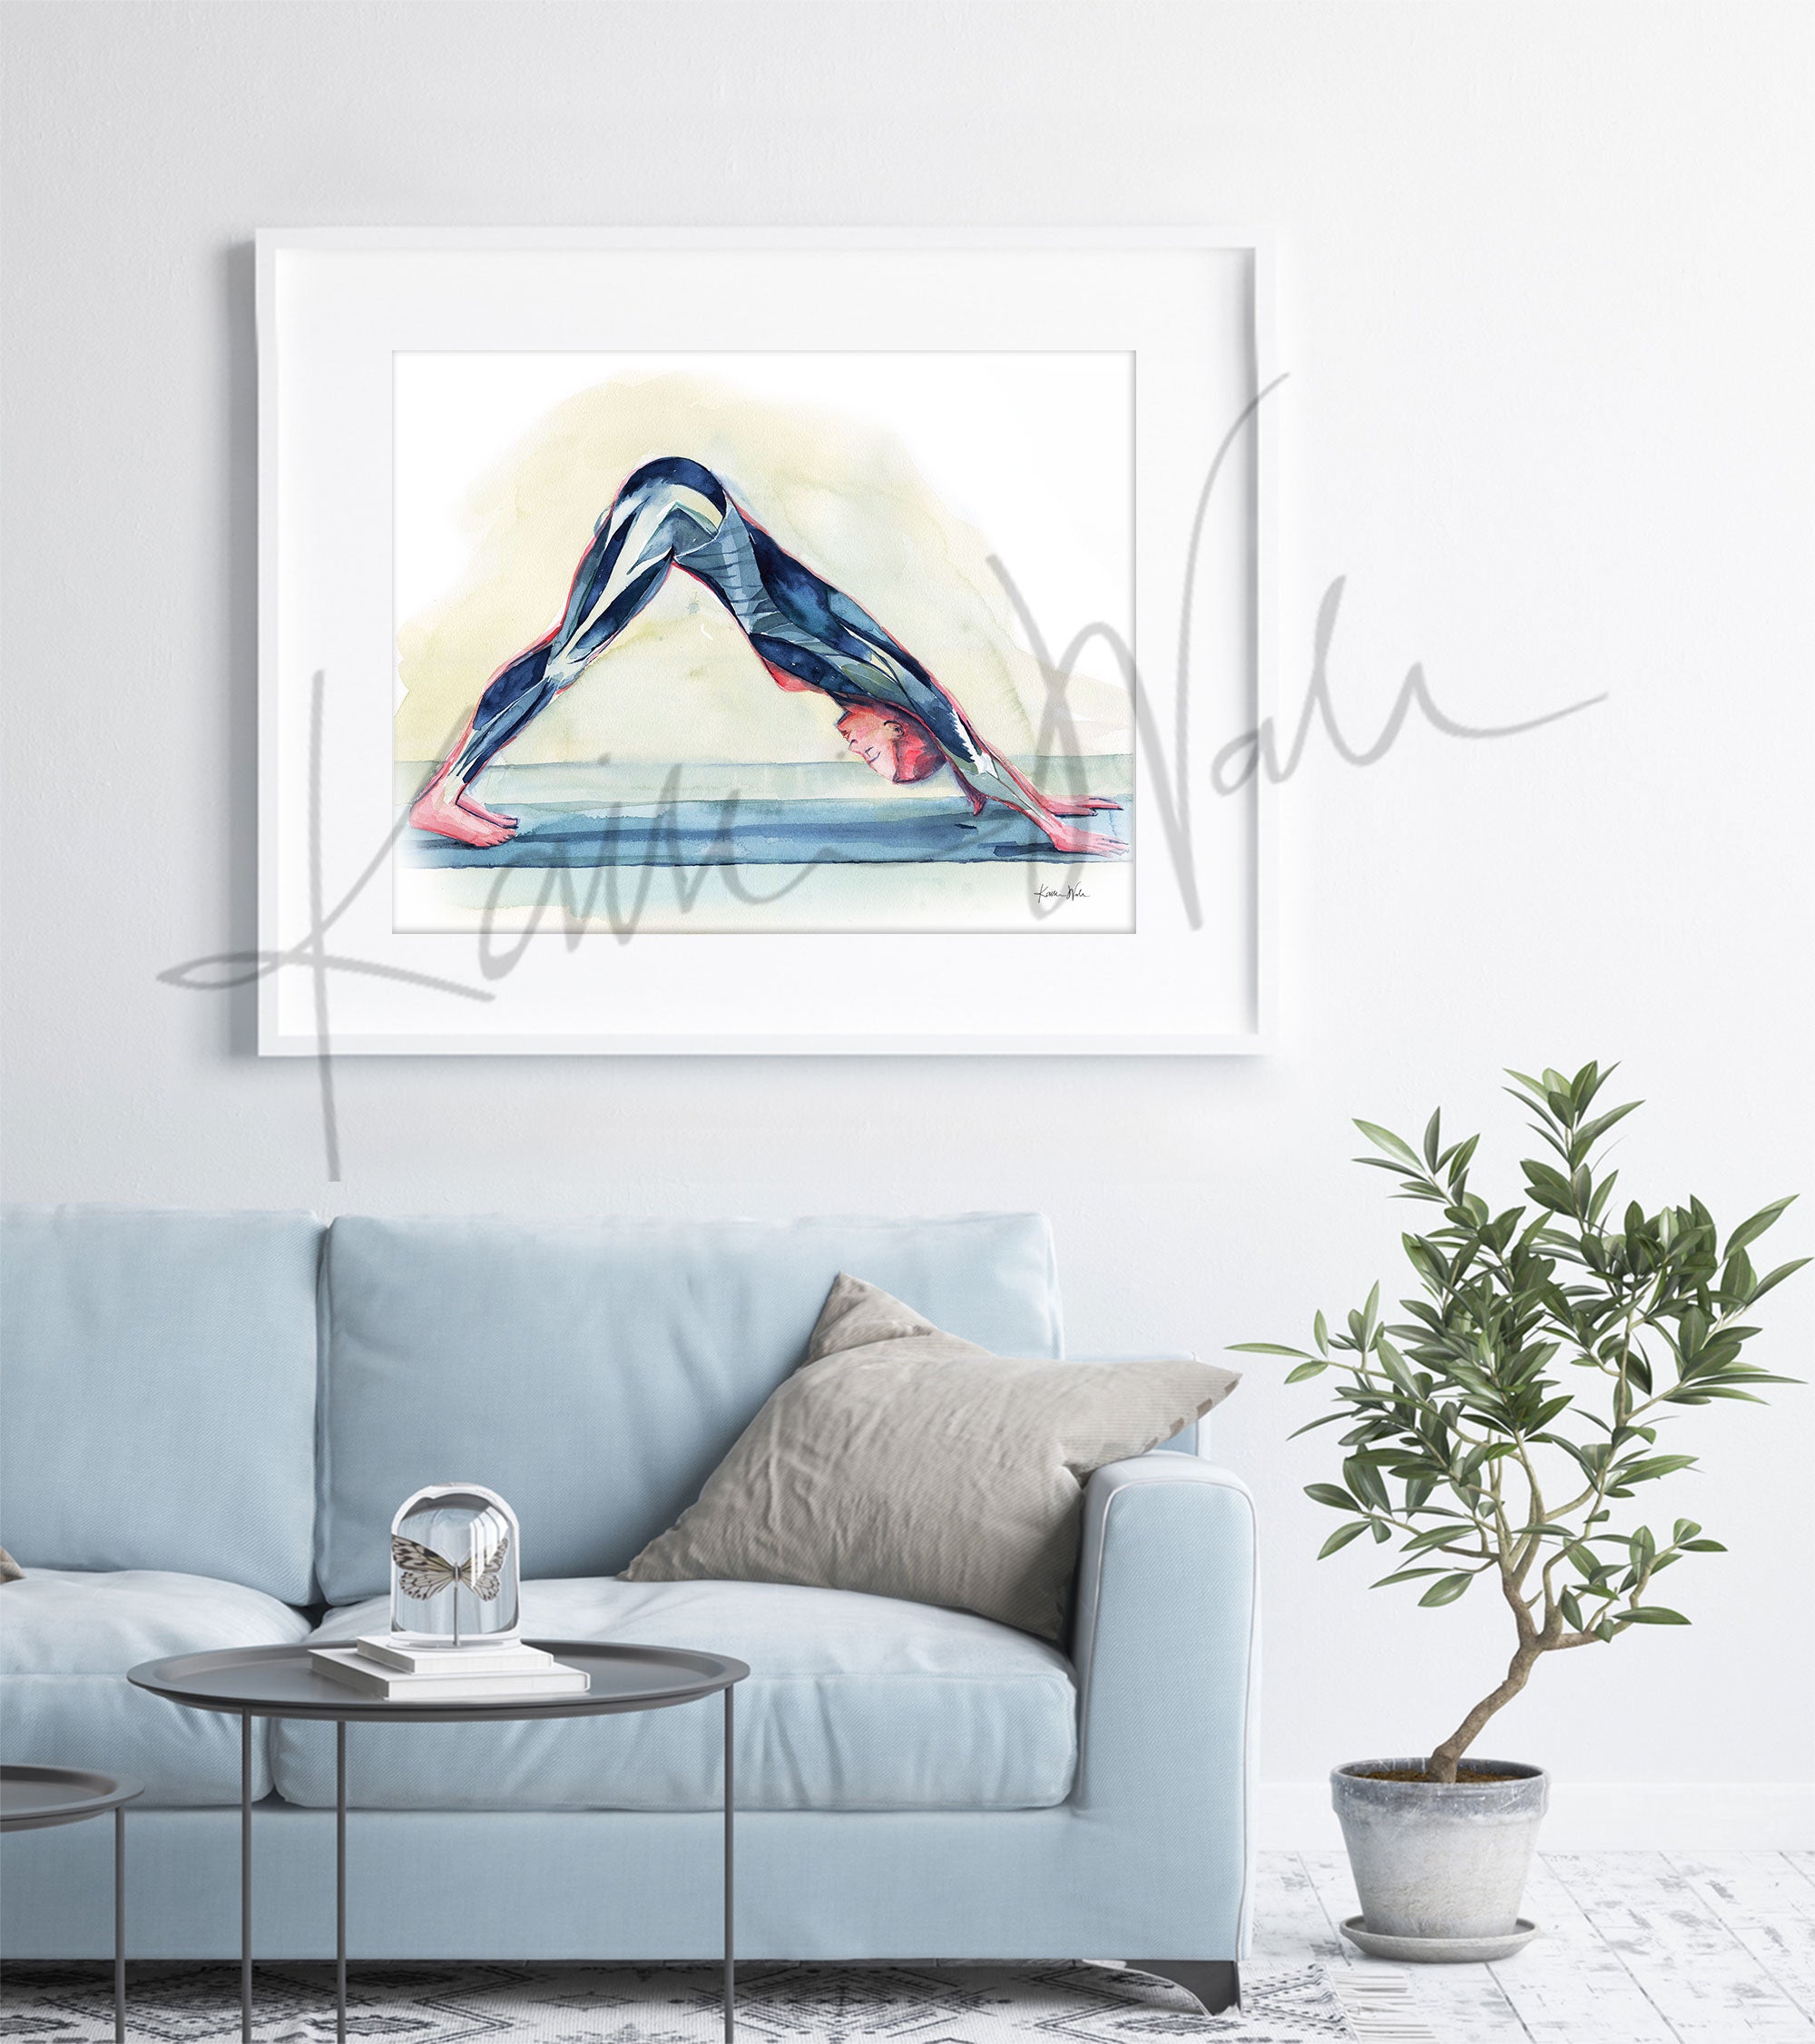 Framed watercolor painting of a woman doing a down dog yoga pose and shows her muscular anatomy within the pose. The painting is hanging over a blue couch.